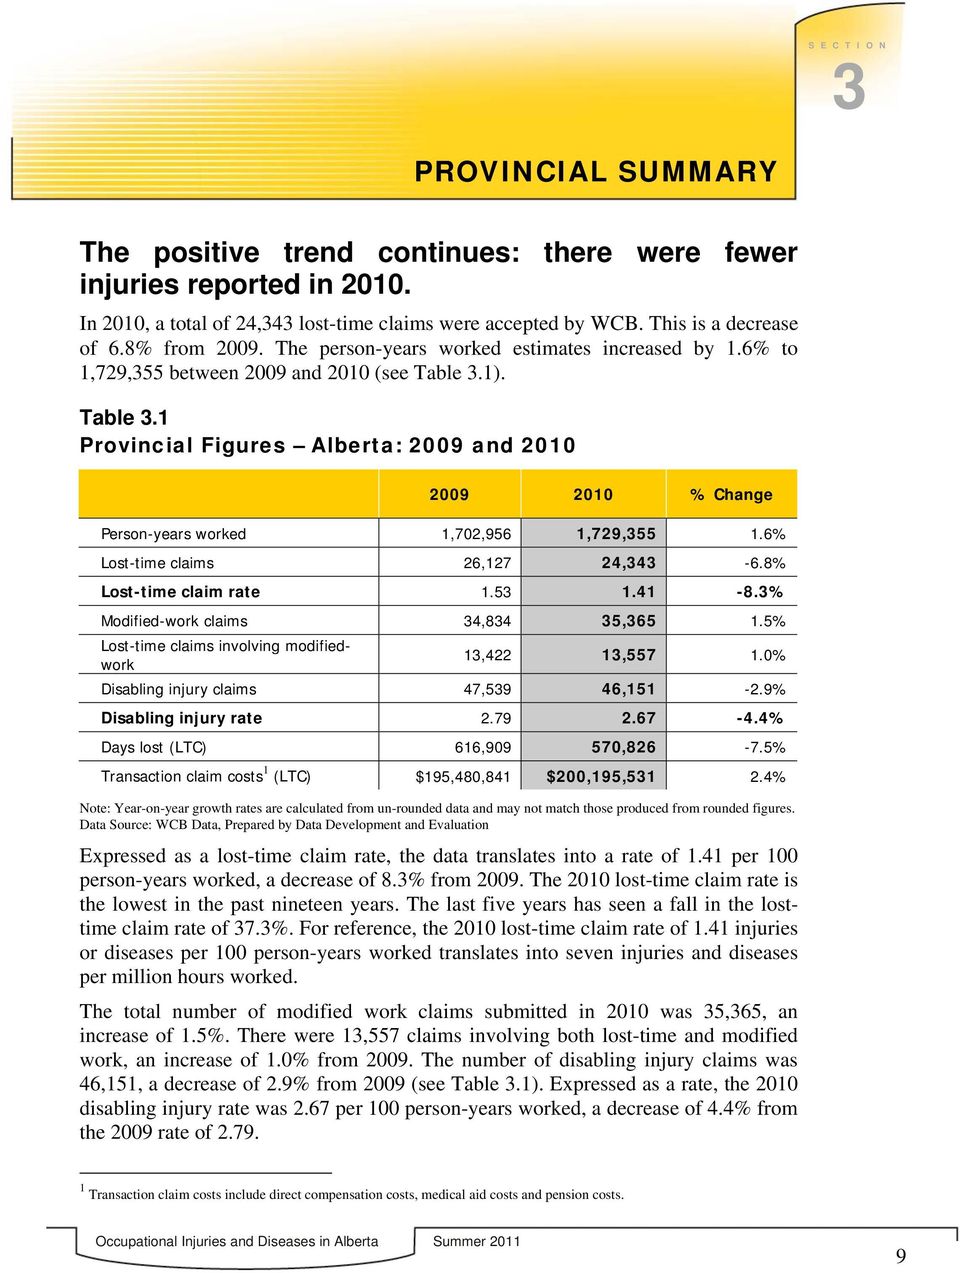 1). Table 3.1 Provincial Figures Alberta: 2009 and 2010 2009 2010 % Change Person-years worked 1,702,956 1,729,355 1.6% Lost-time claims 26,127 24,343-6.8% Lost-time claim rate 1.53 1.41-8.